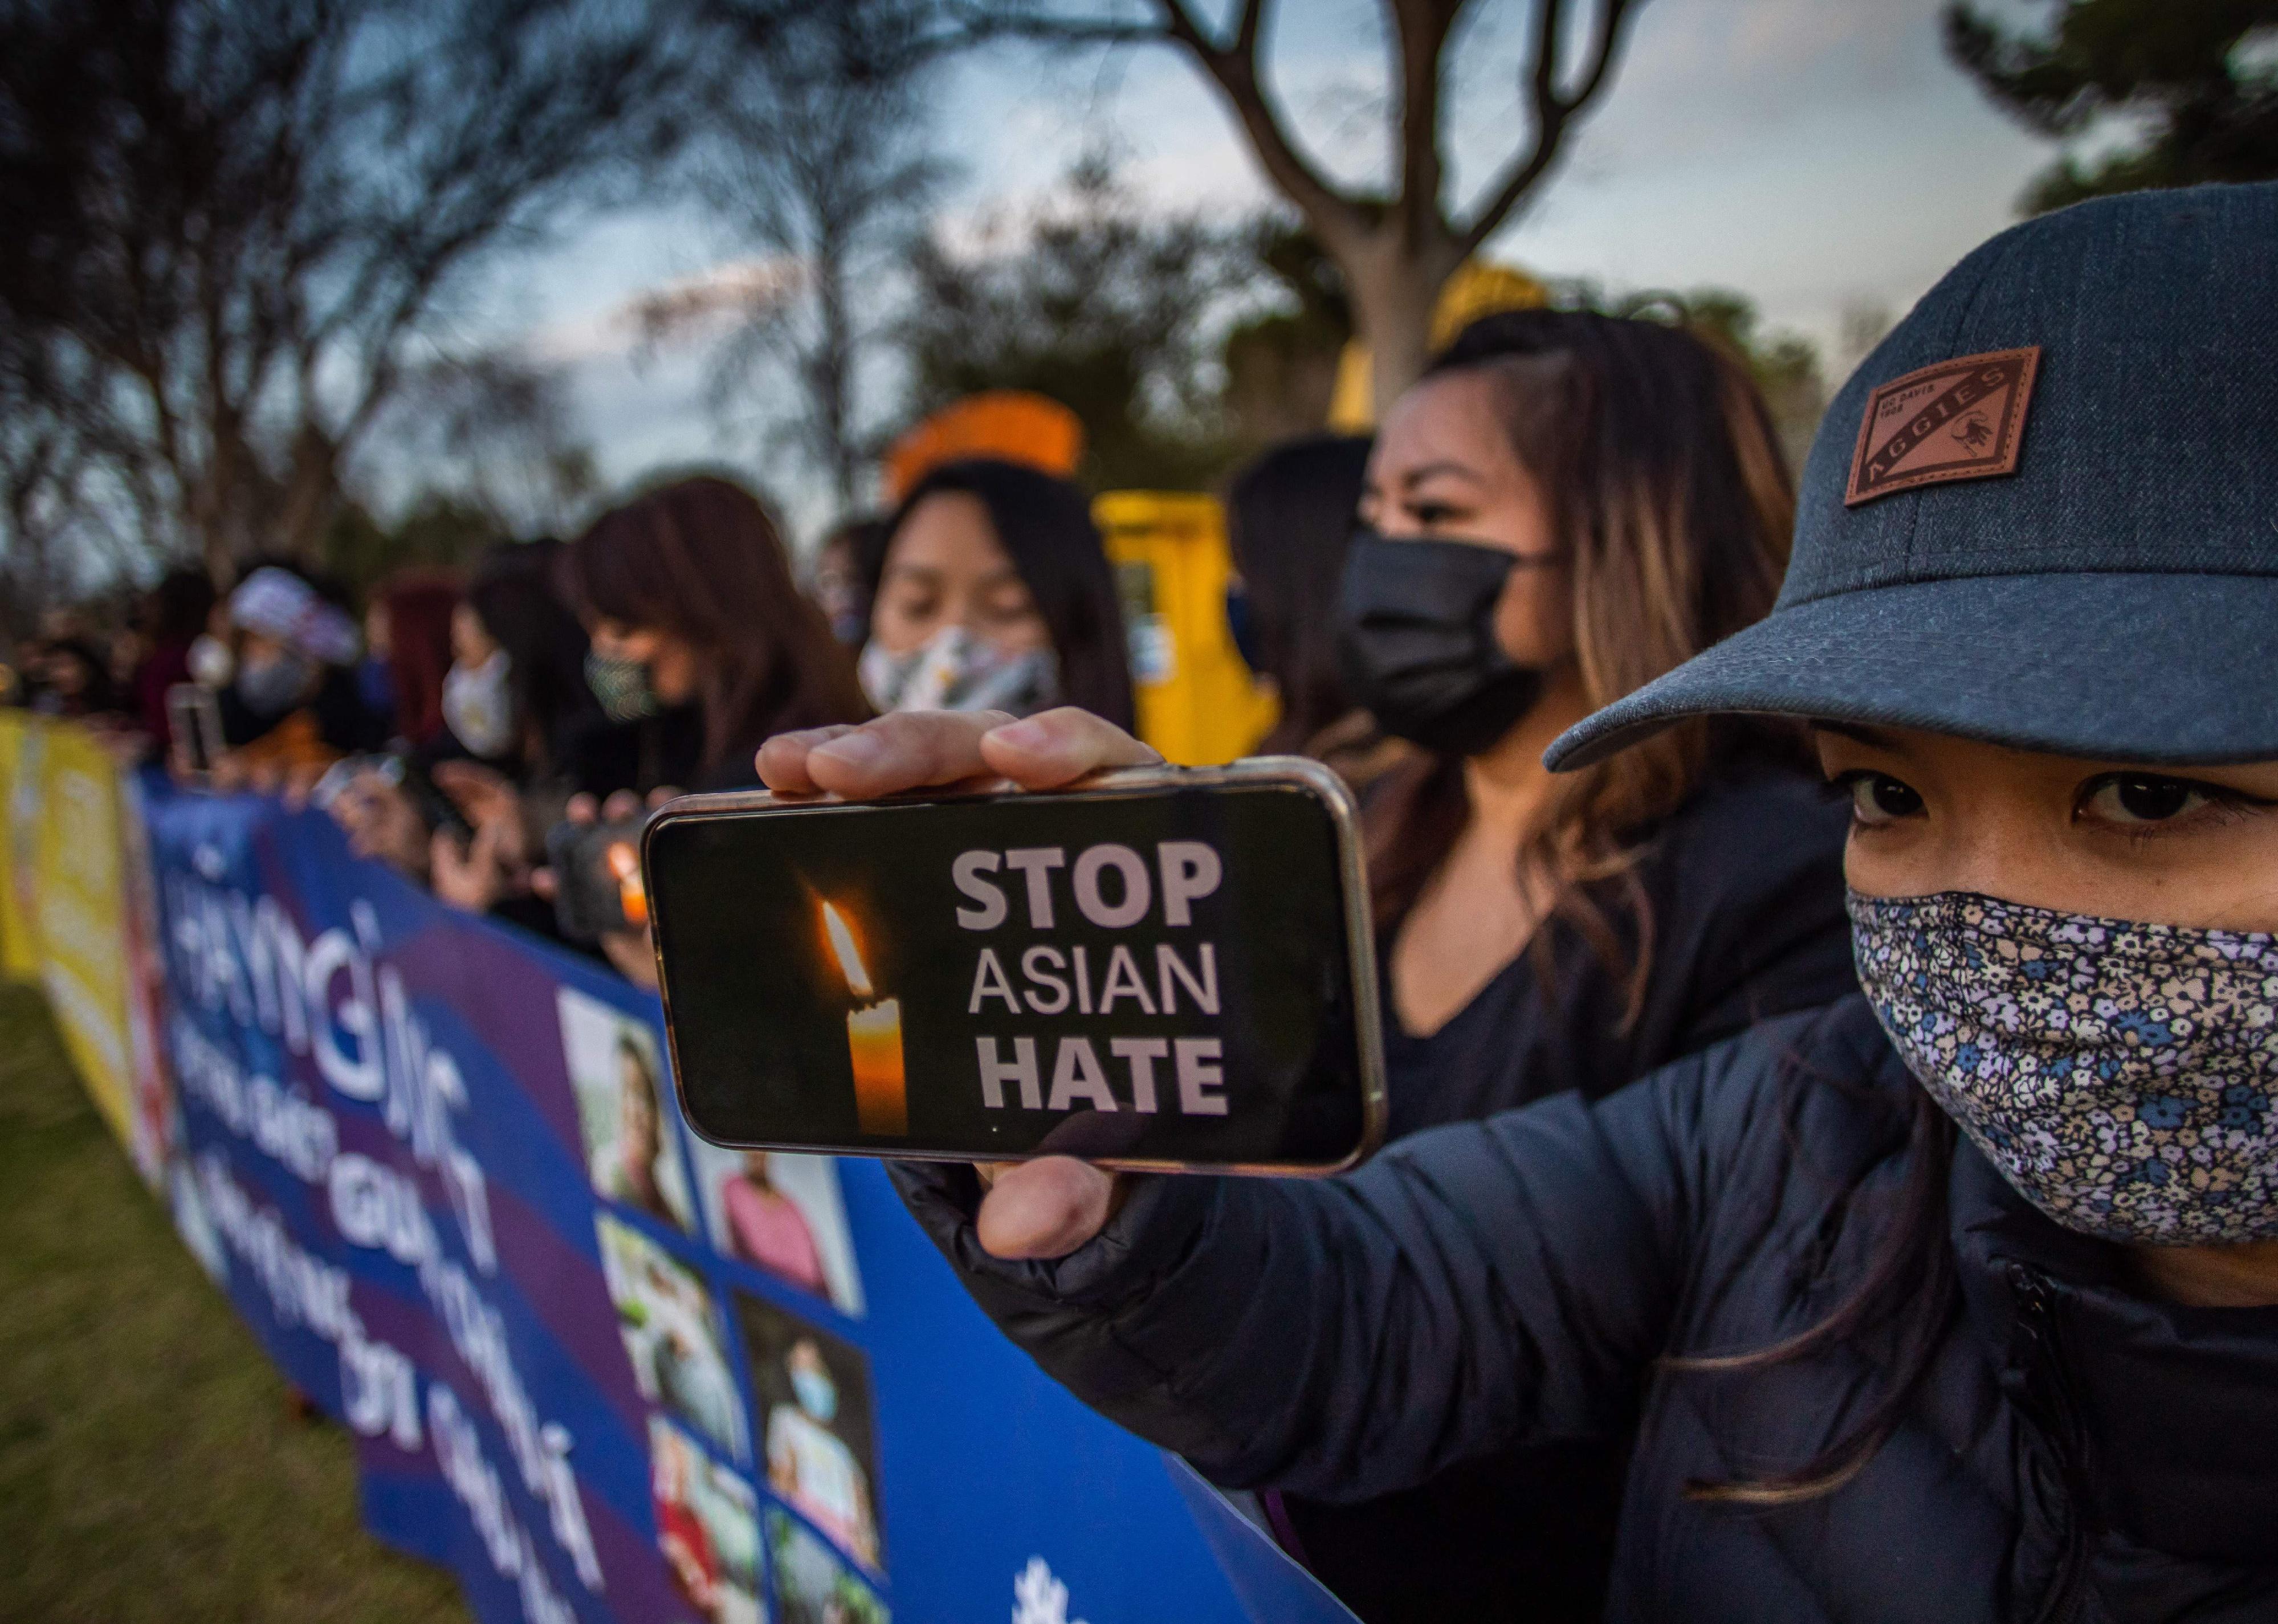 People wearing masks stand behind signs against Asian hate.